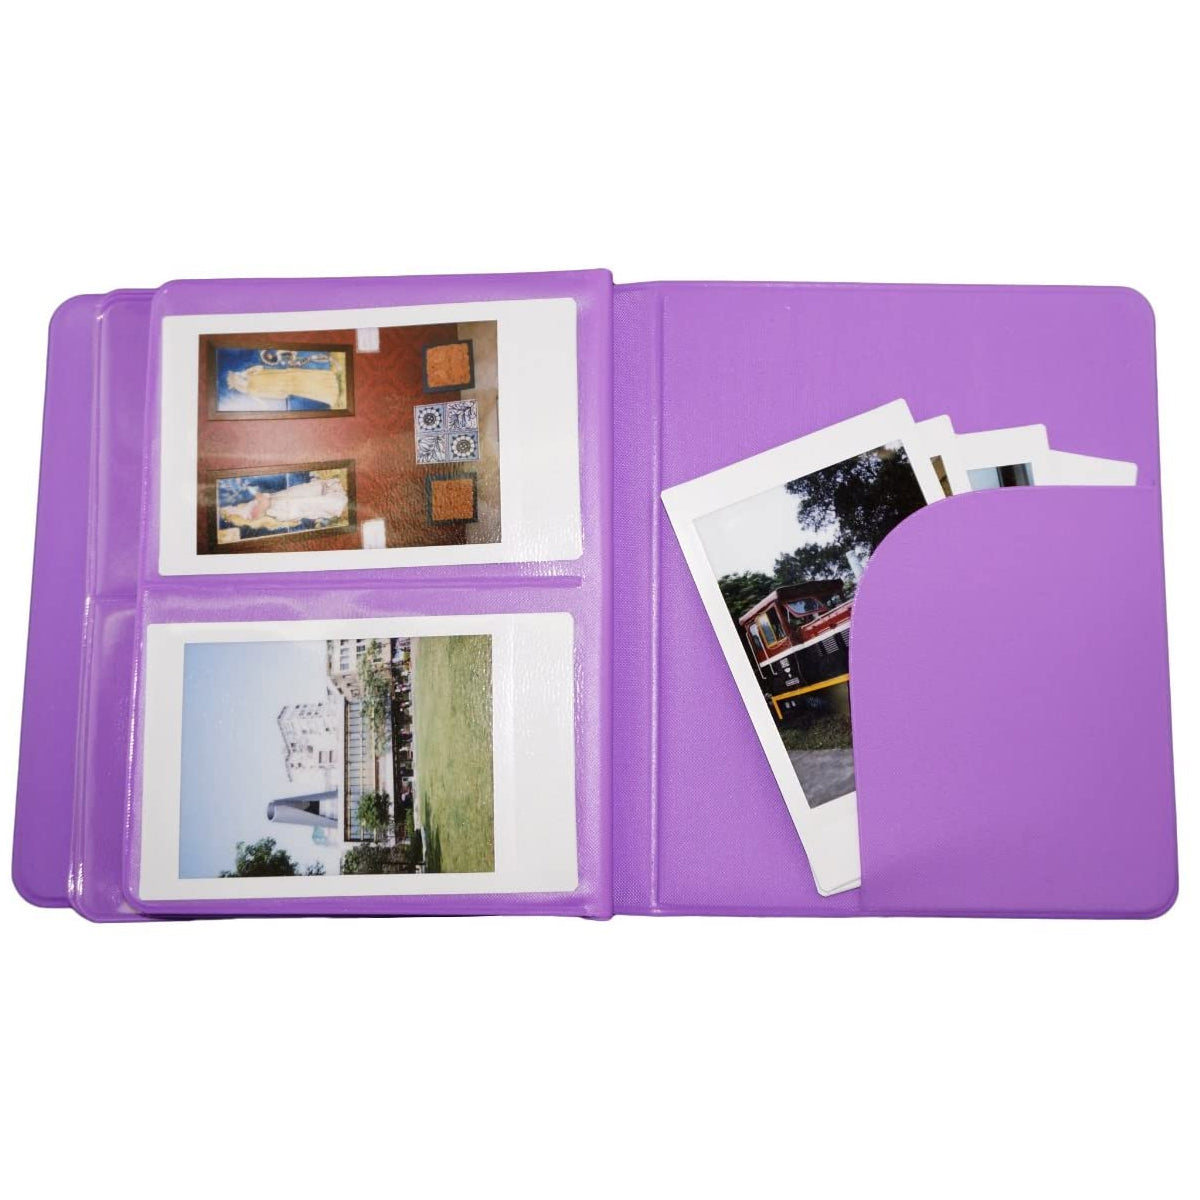 Fujifilm Instax Mini 10X1 blue marble Instant Film with Instax Time Photo Album 64 Sheets (Violet Purple)